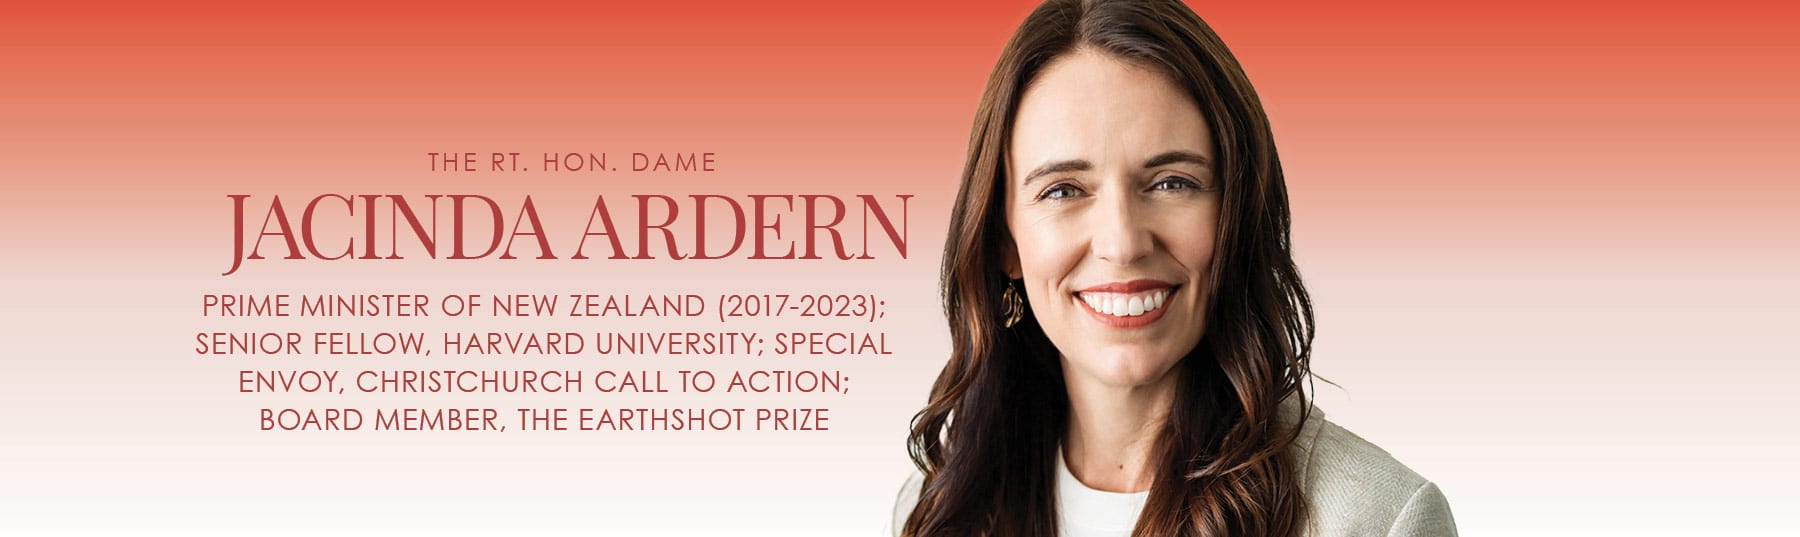 Join The Right Honourable Dame Jacinda Ardern at the Texas Conference for Women this November 16th!